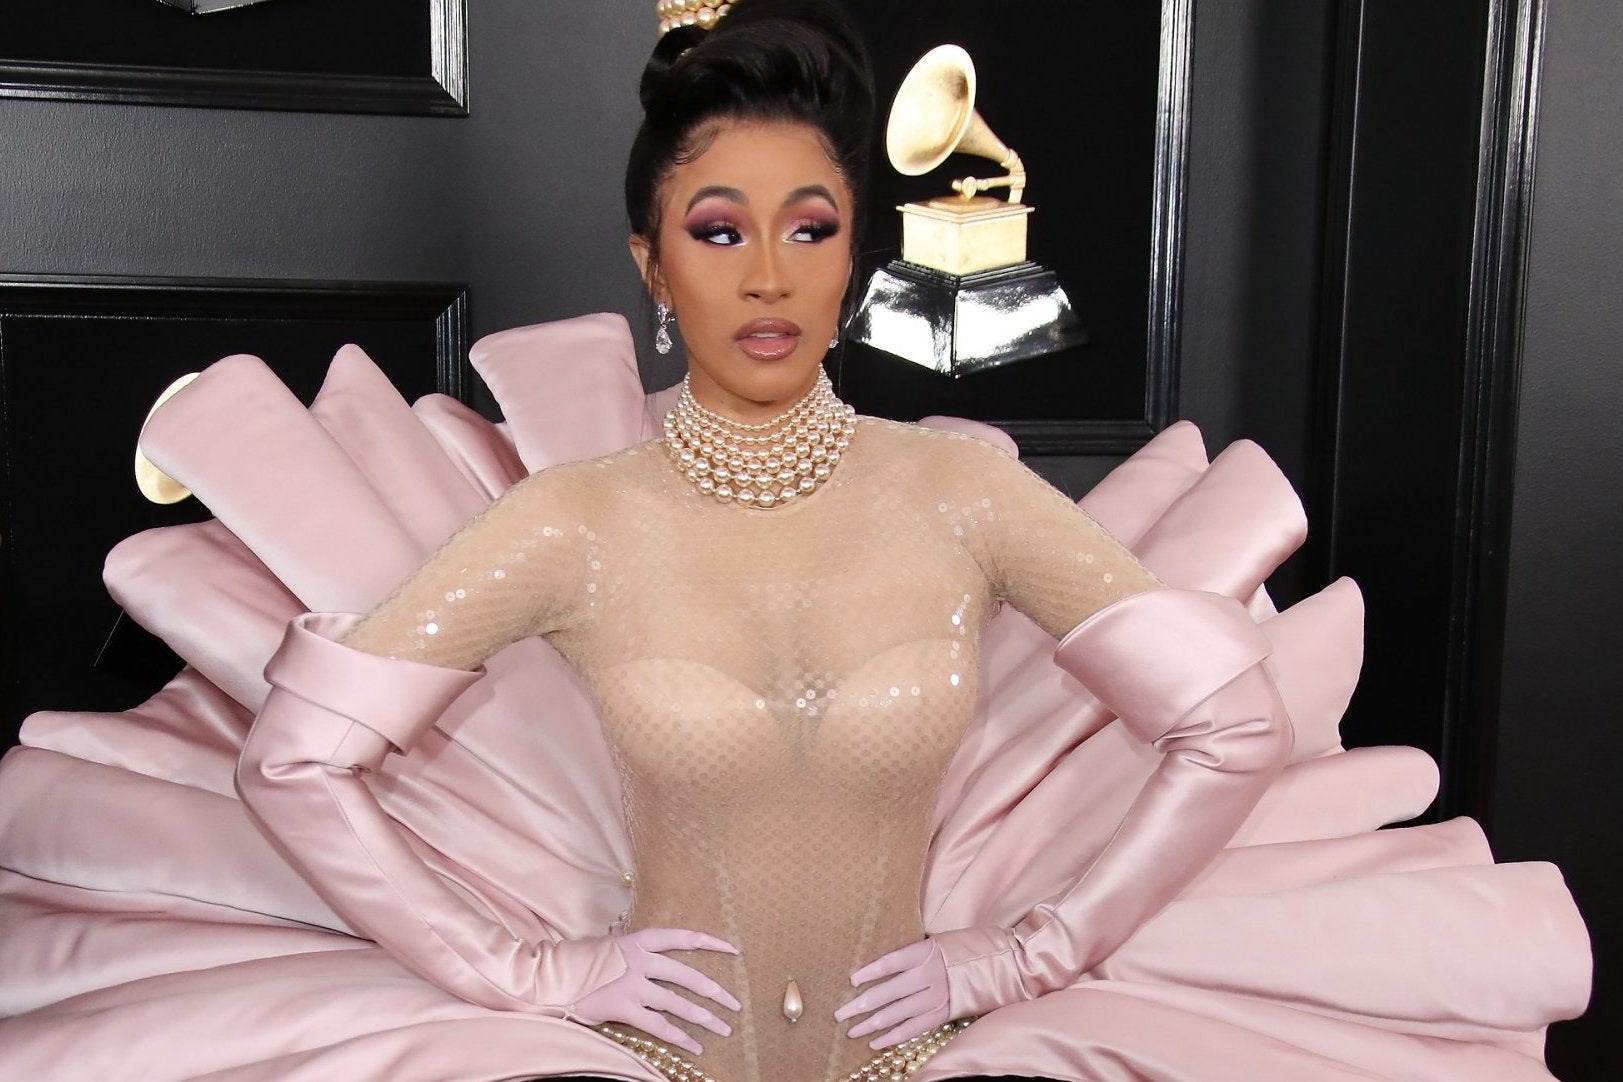 Cardi B attends the 61st Annual Grammy Awards at Staples Center on 10 February, 2019 in Los Angeles, California.